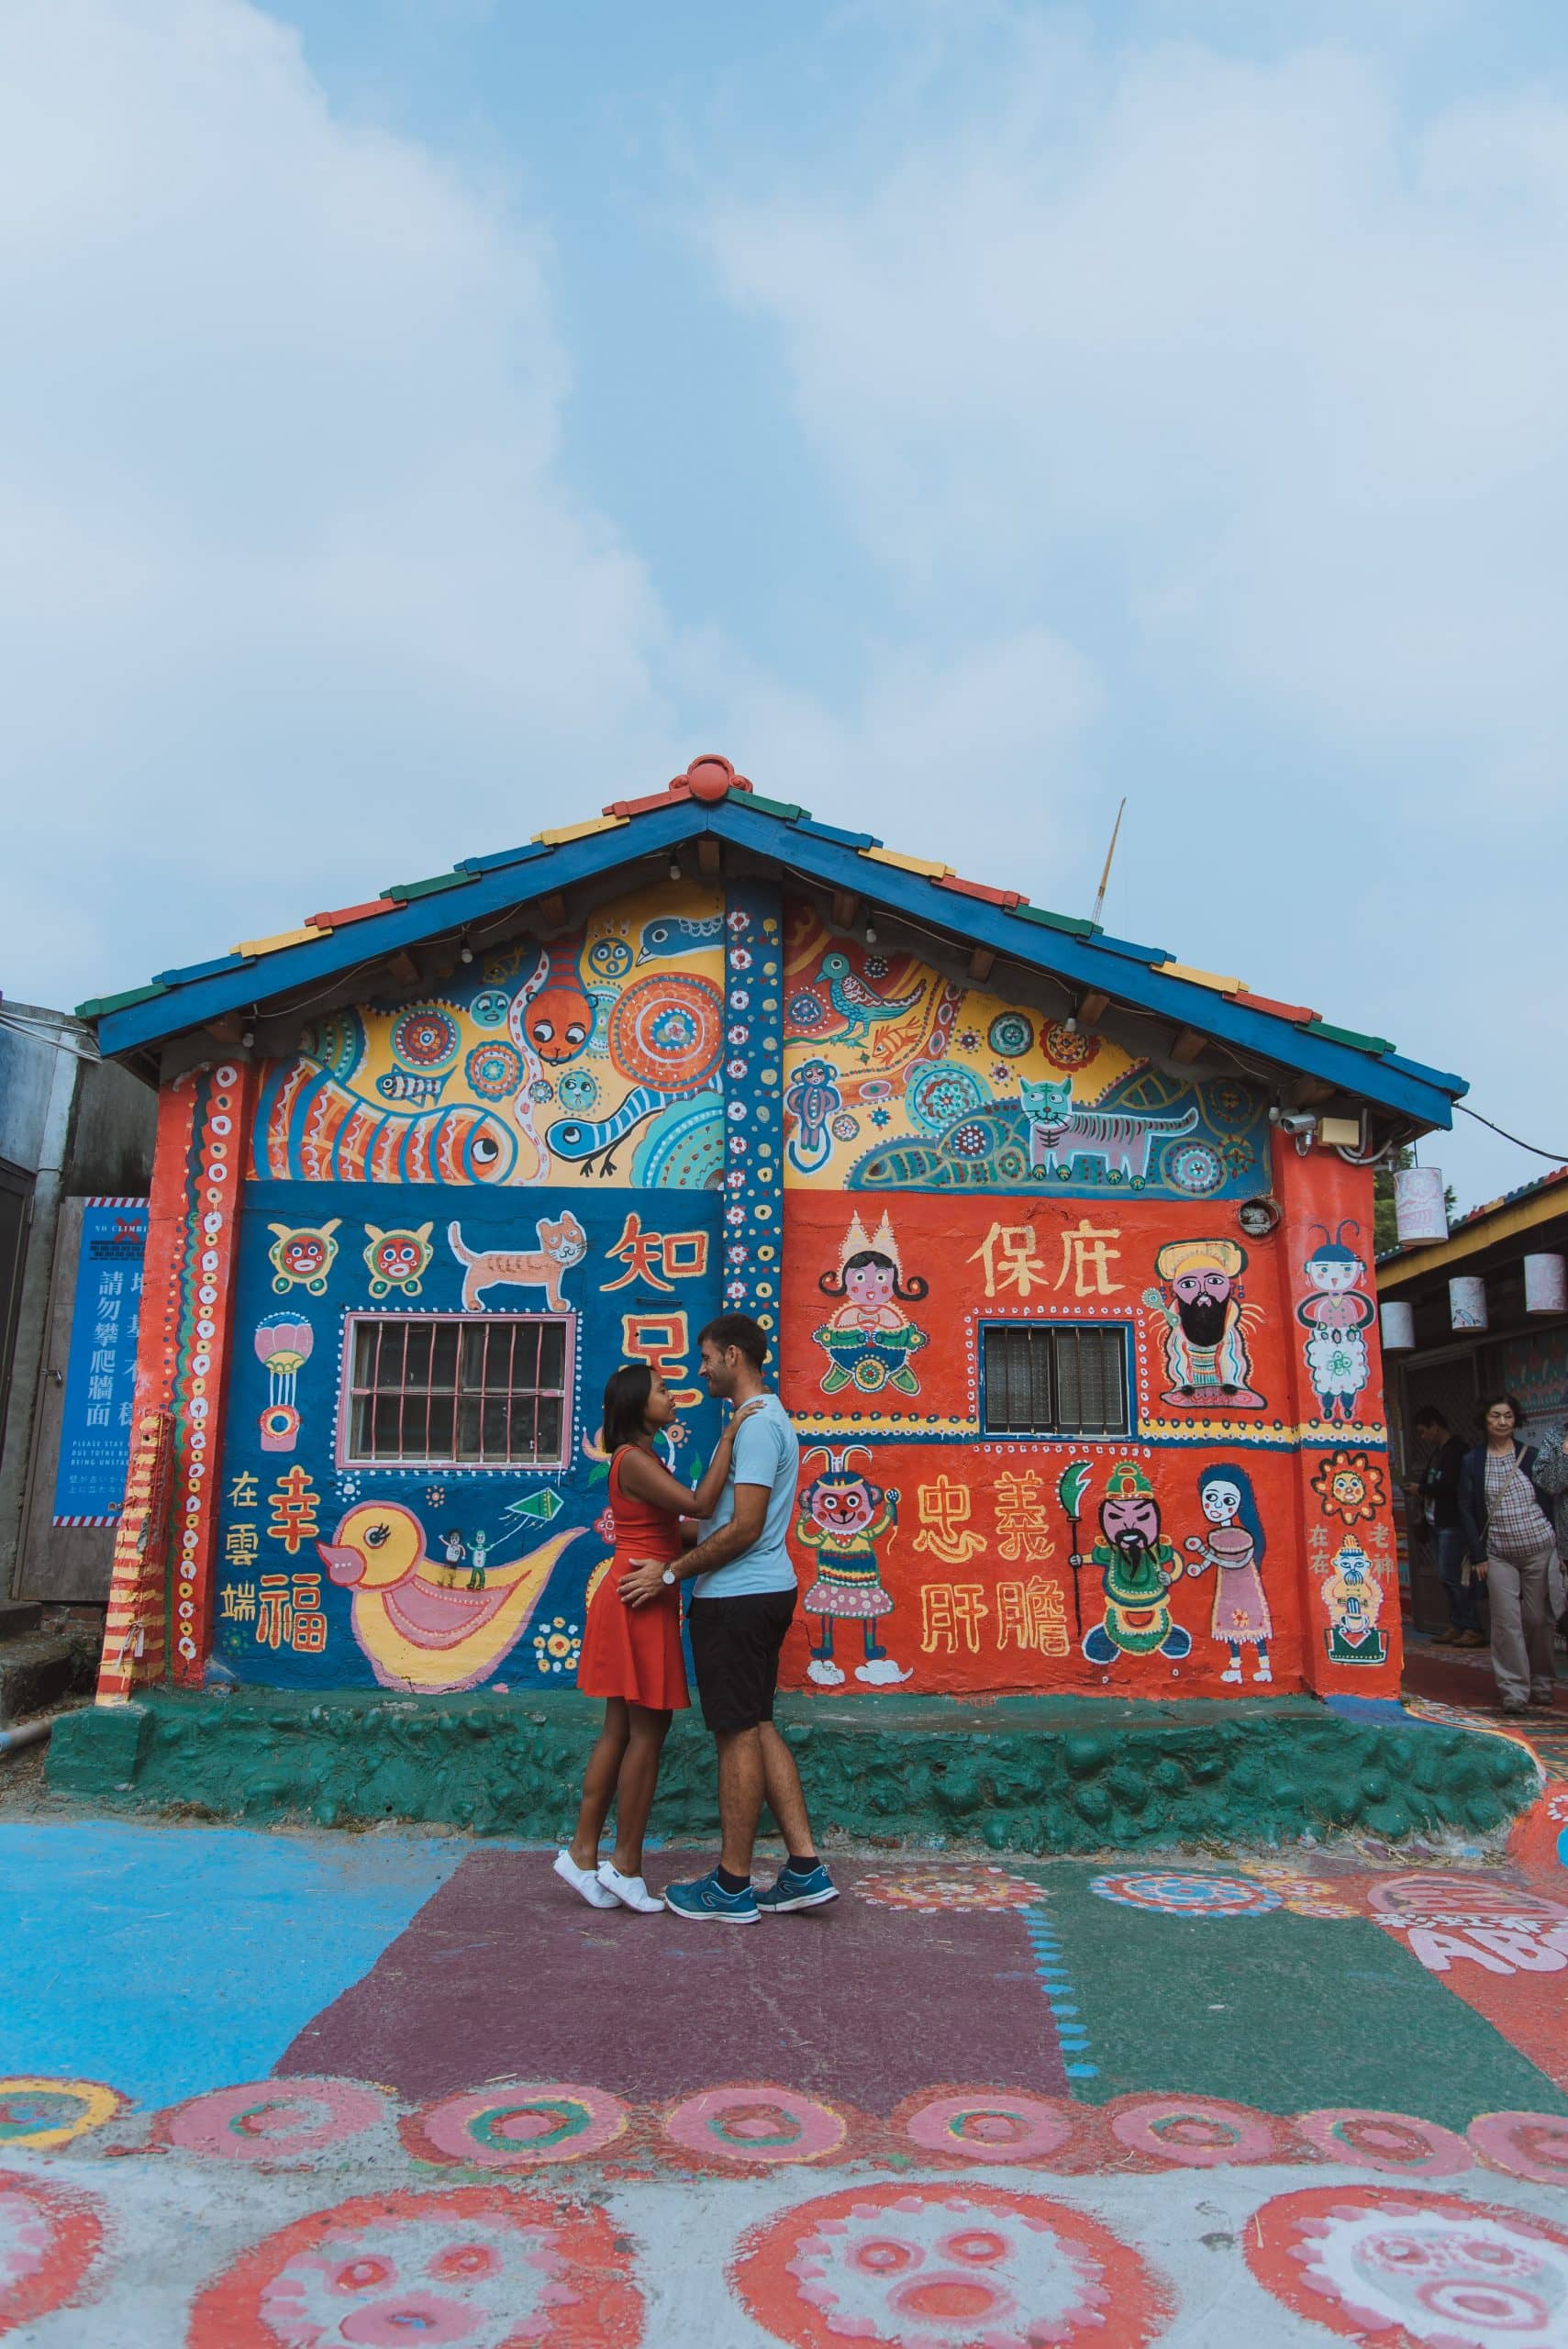 Most Instagrammable Places in Taipei, Instagram Spots in Taipei, Taichung Travel Guide, Taichung Tourist Spots, One Week Taiwan Itinerary, How to get to Rainbow Village, Rainbow Village travel guide